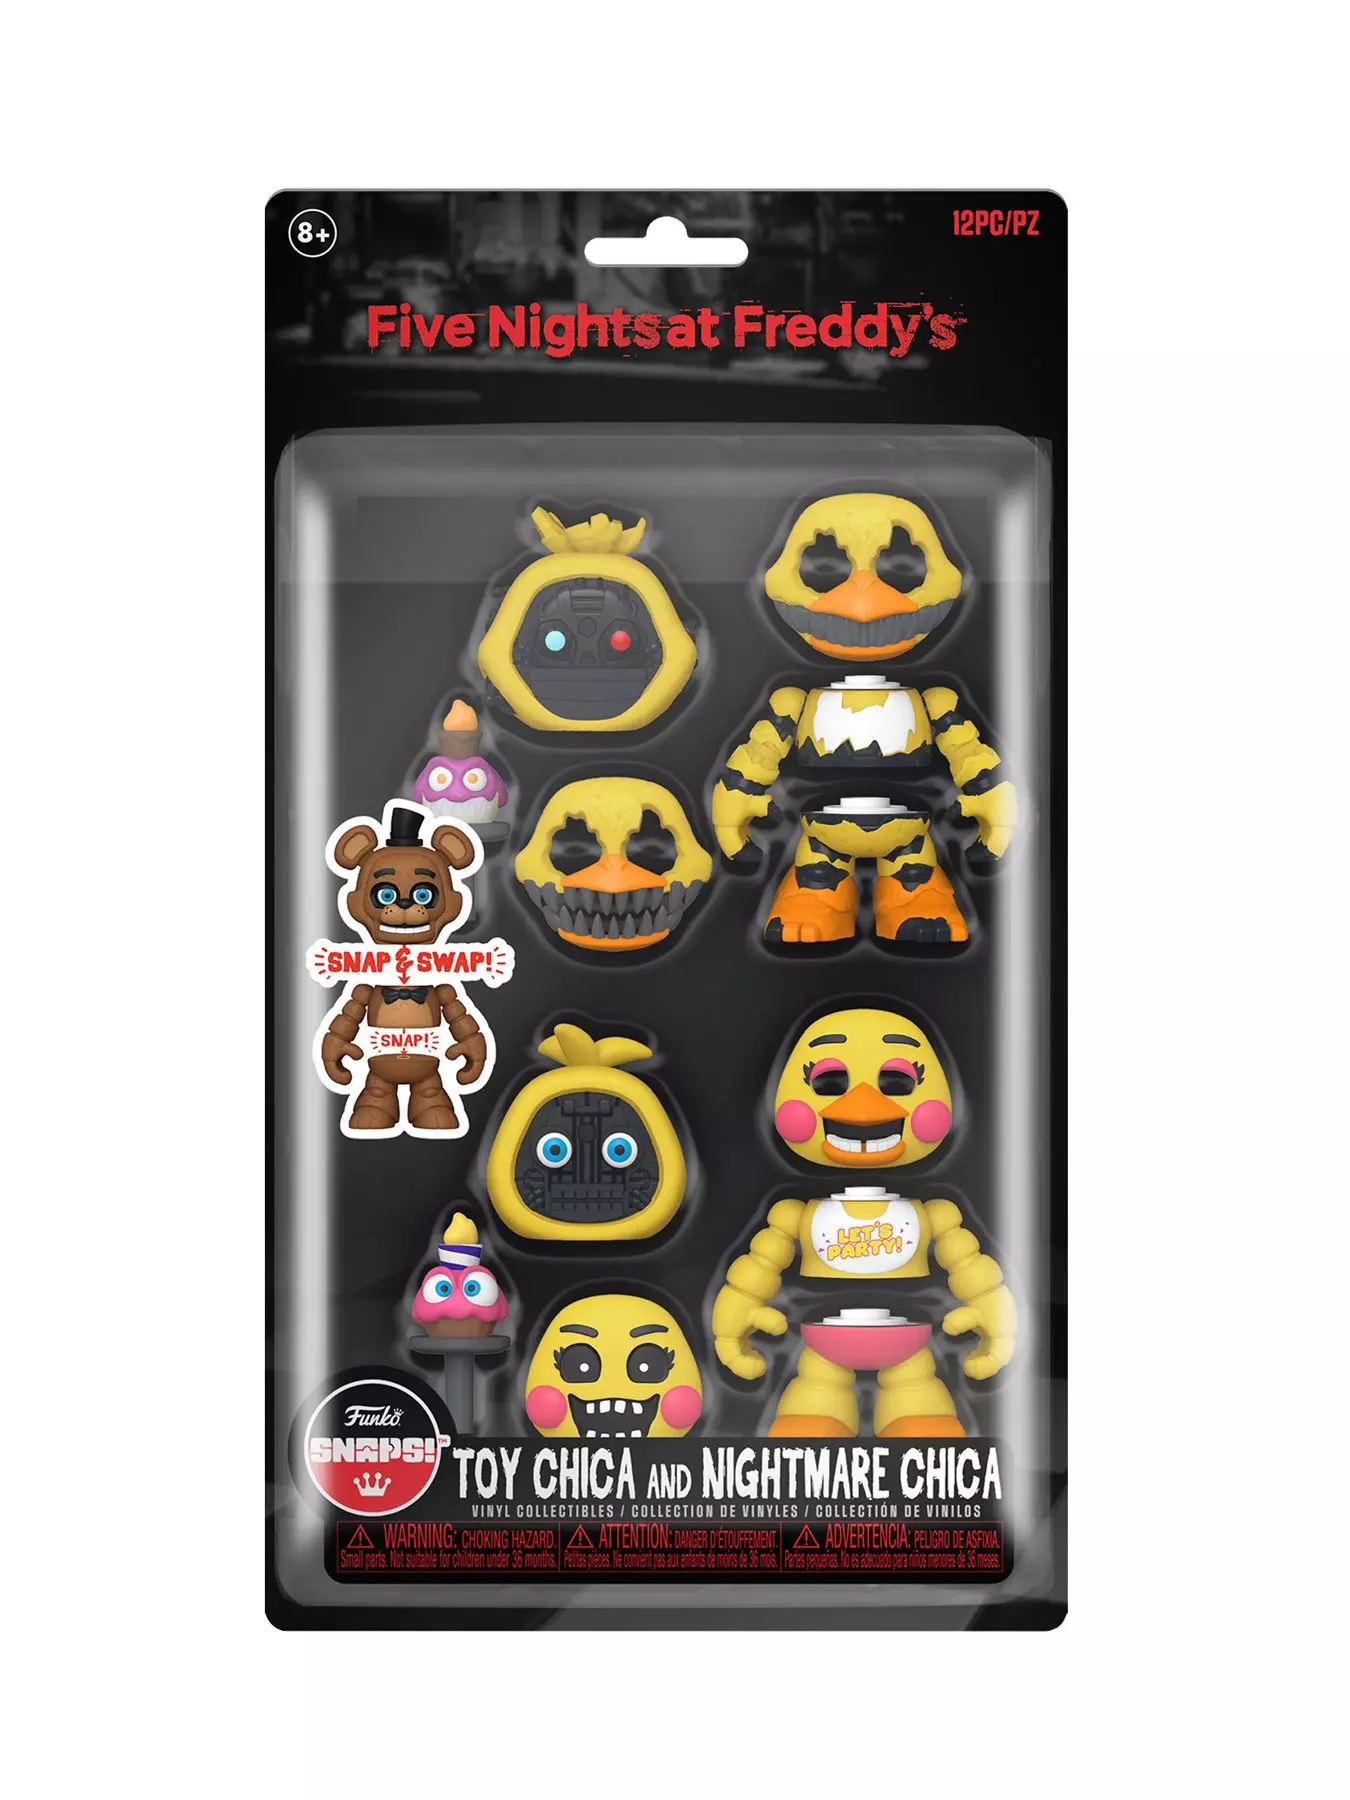 FNaF World Update 3 (Reimagined) by ToyChica Entertainment